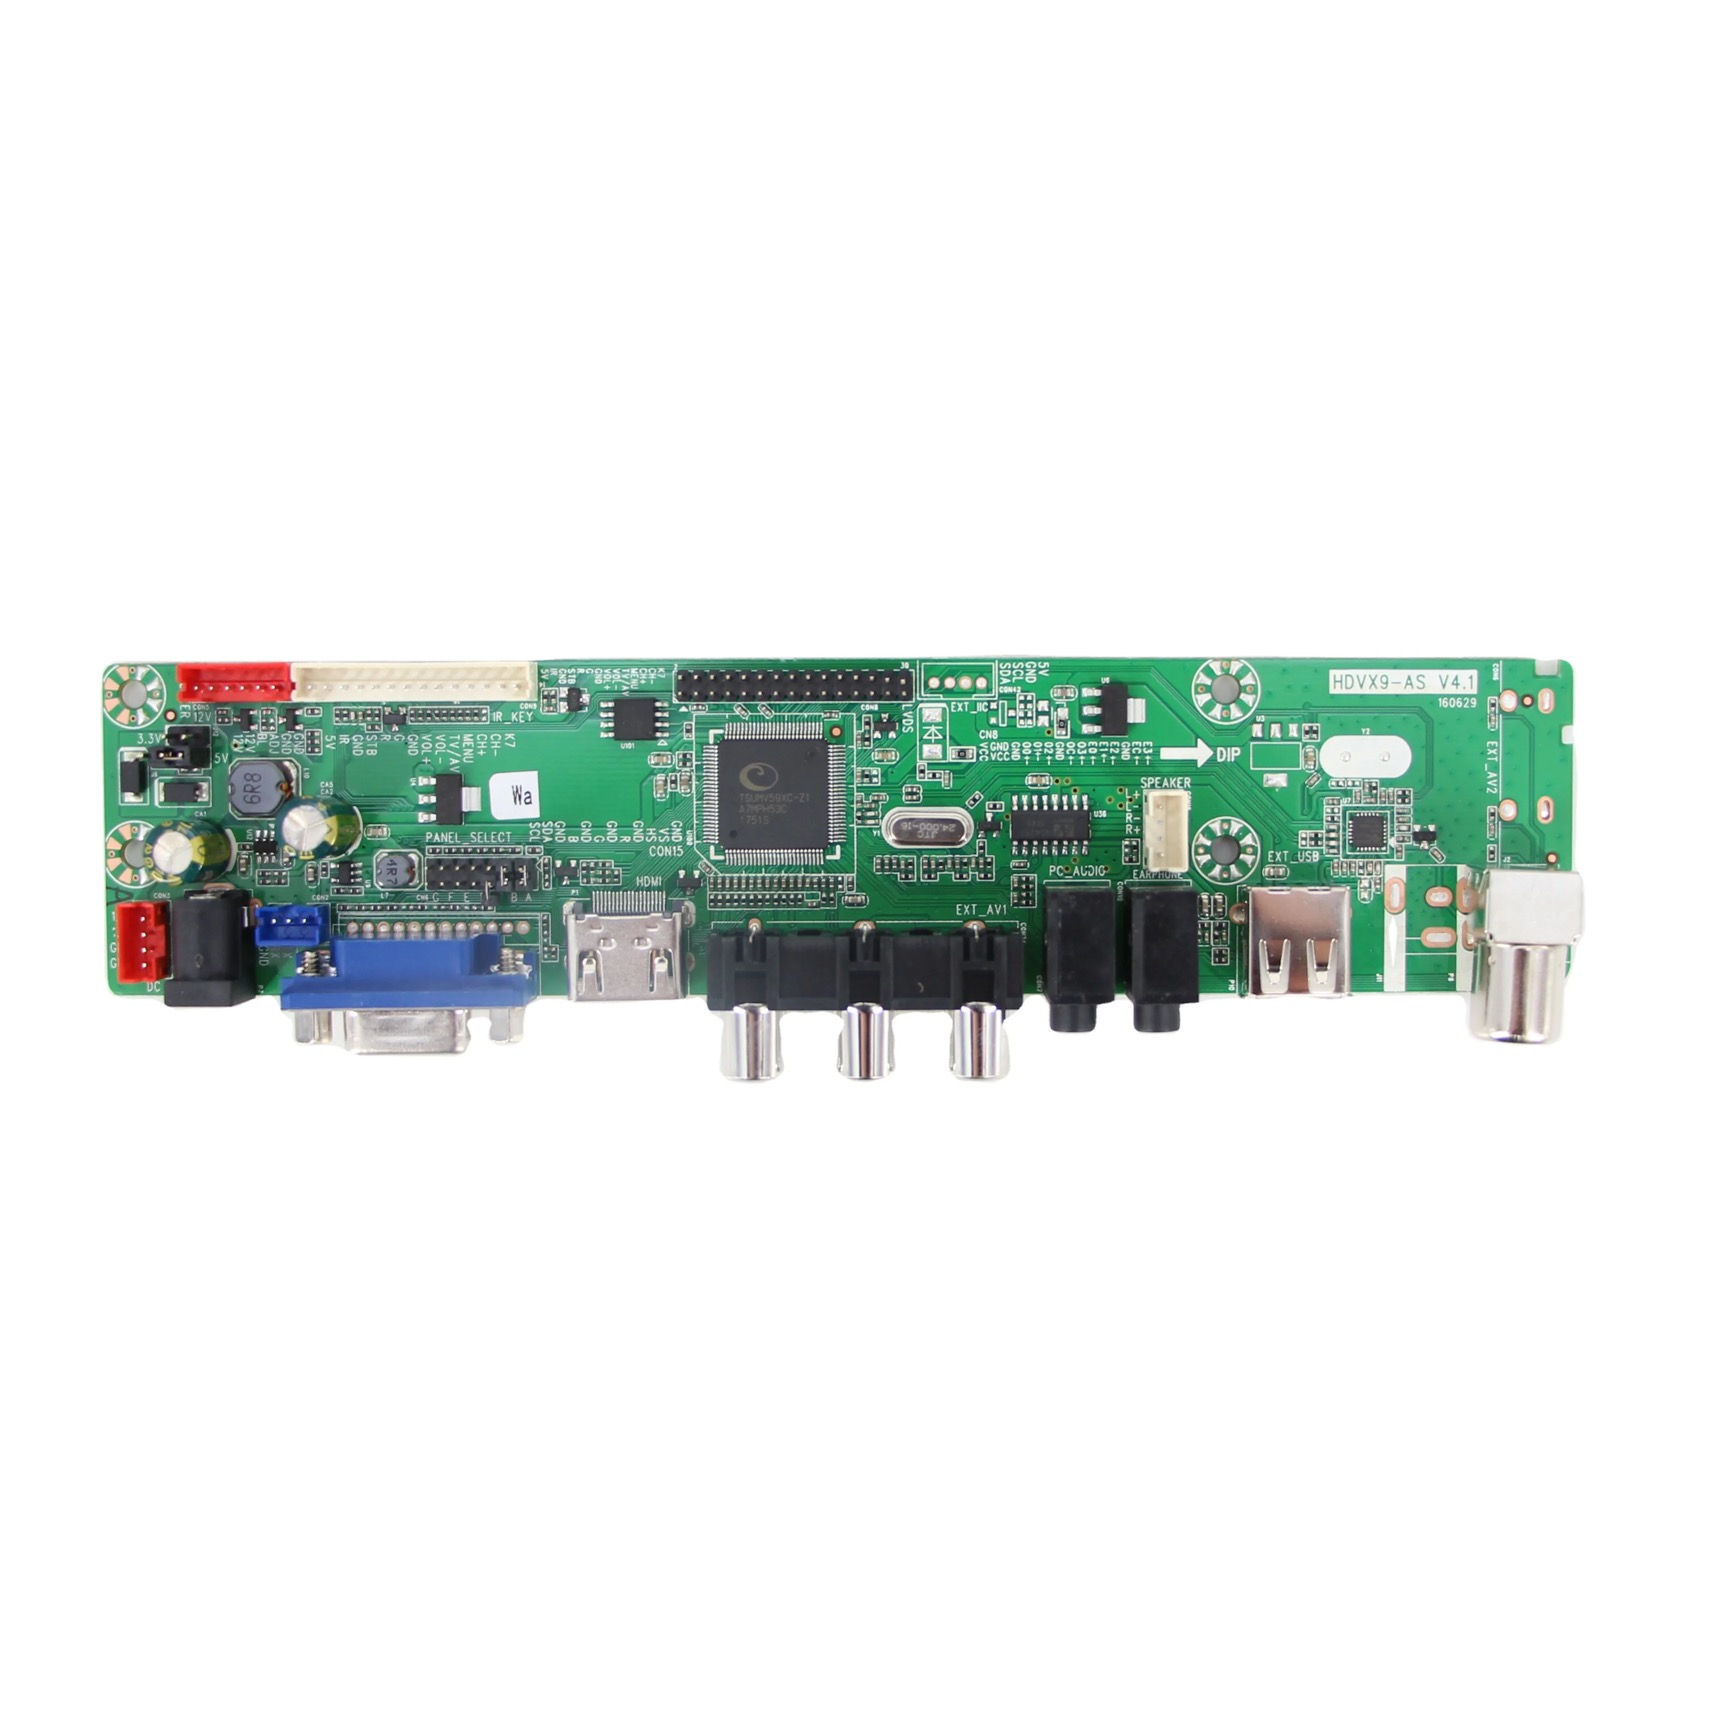 LED TV mainboard v59 lc mother pcb board universal 24inch -32inch HDVX9-AS-4.3 analog tv system motherboard 